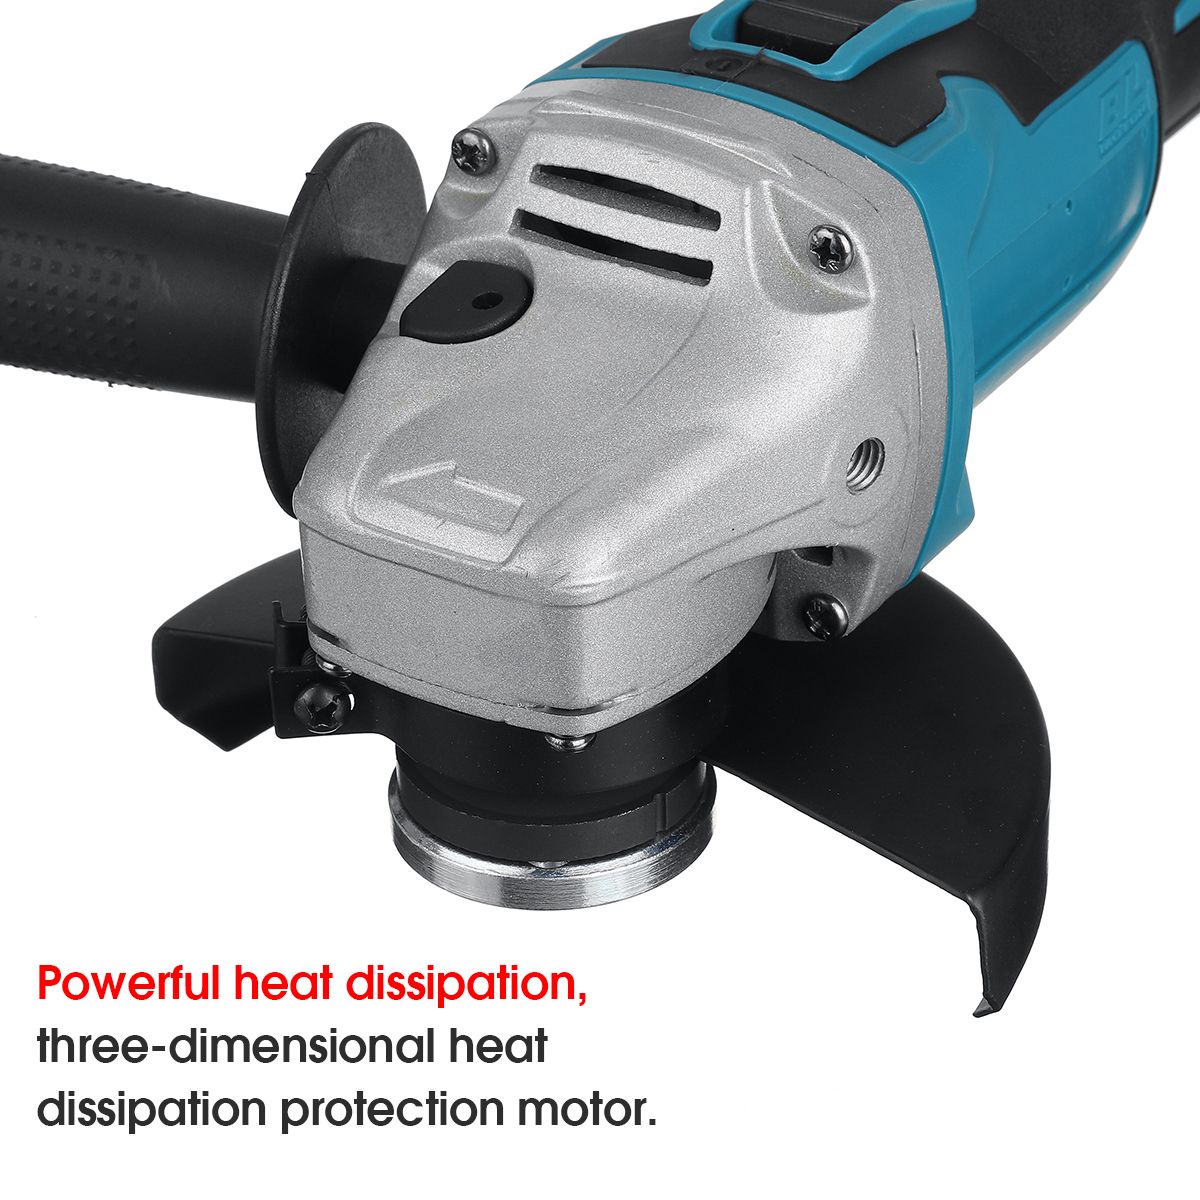 125mm-Brushless-Electric-Angle-Grinder-3-Gears-Power-Tool-For-Makita-18V-Battery-1741129